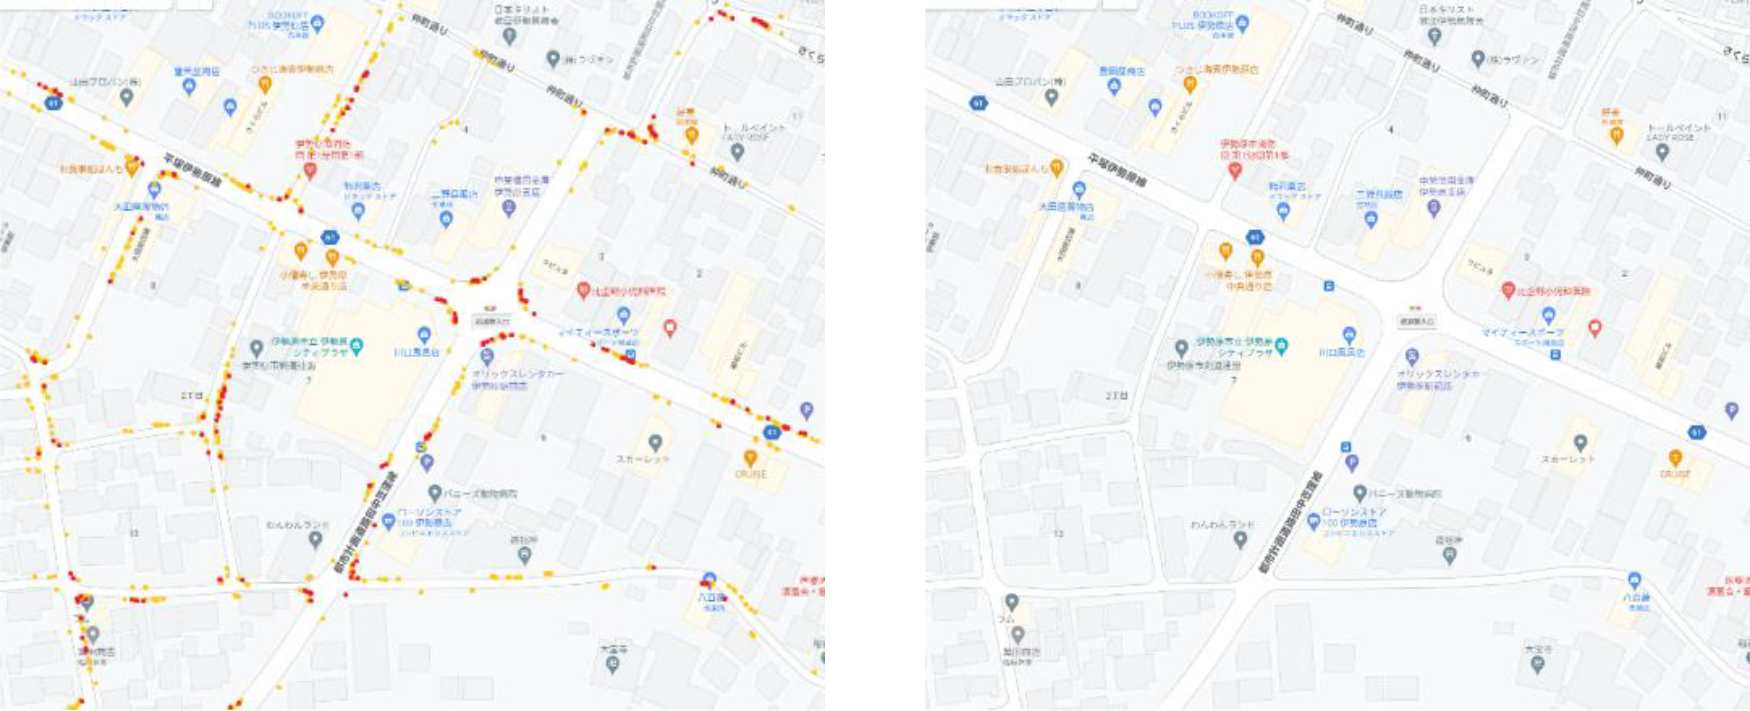 Two types of maps used in the study. (Left: Map with plots showing inaccessibility; Right: Map of the same area without markers).